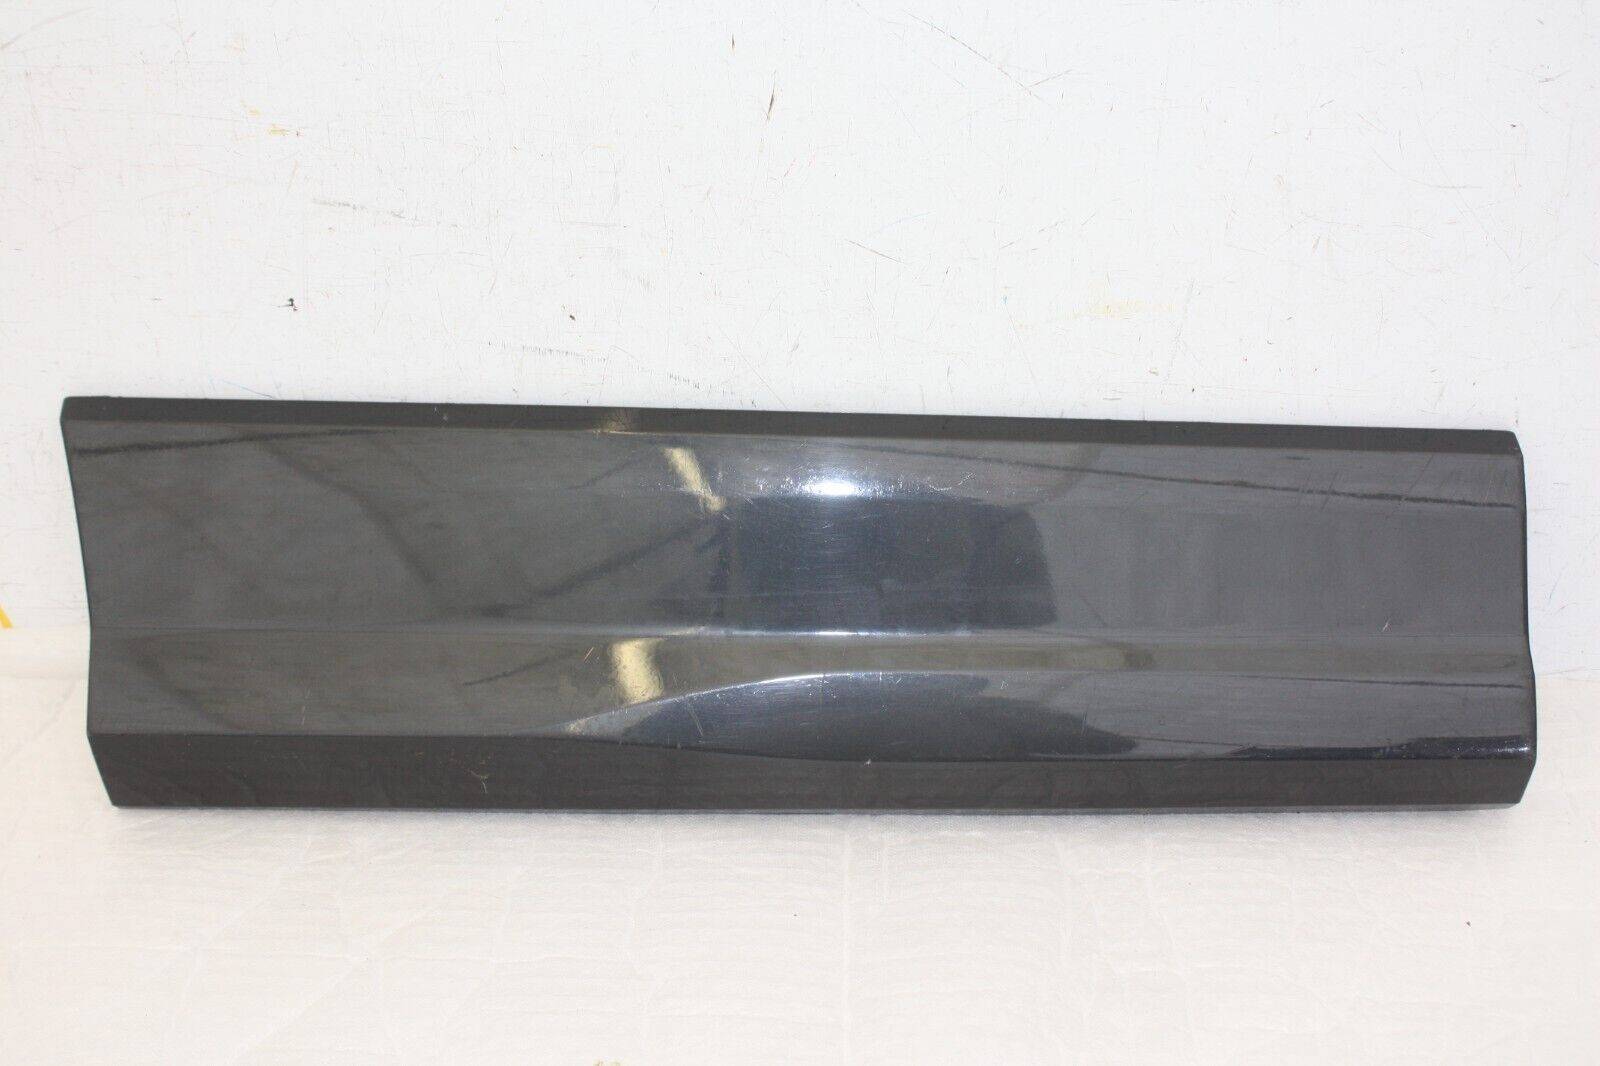 Audi Q2 Rear Right Door Moulding 2016 TO 2021 81A853970B Genuine 176329907578